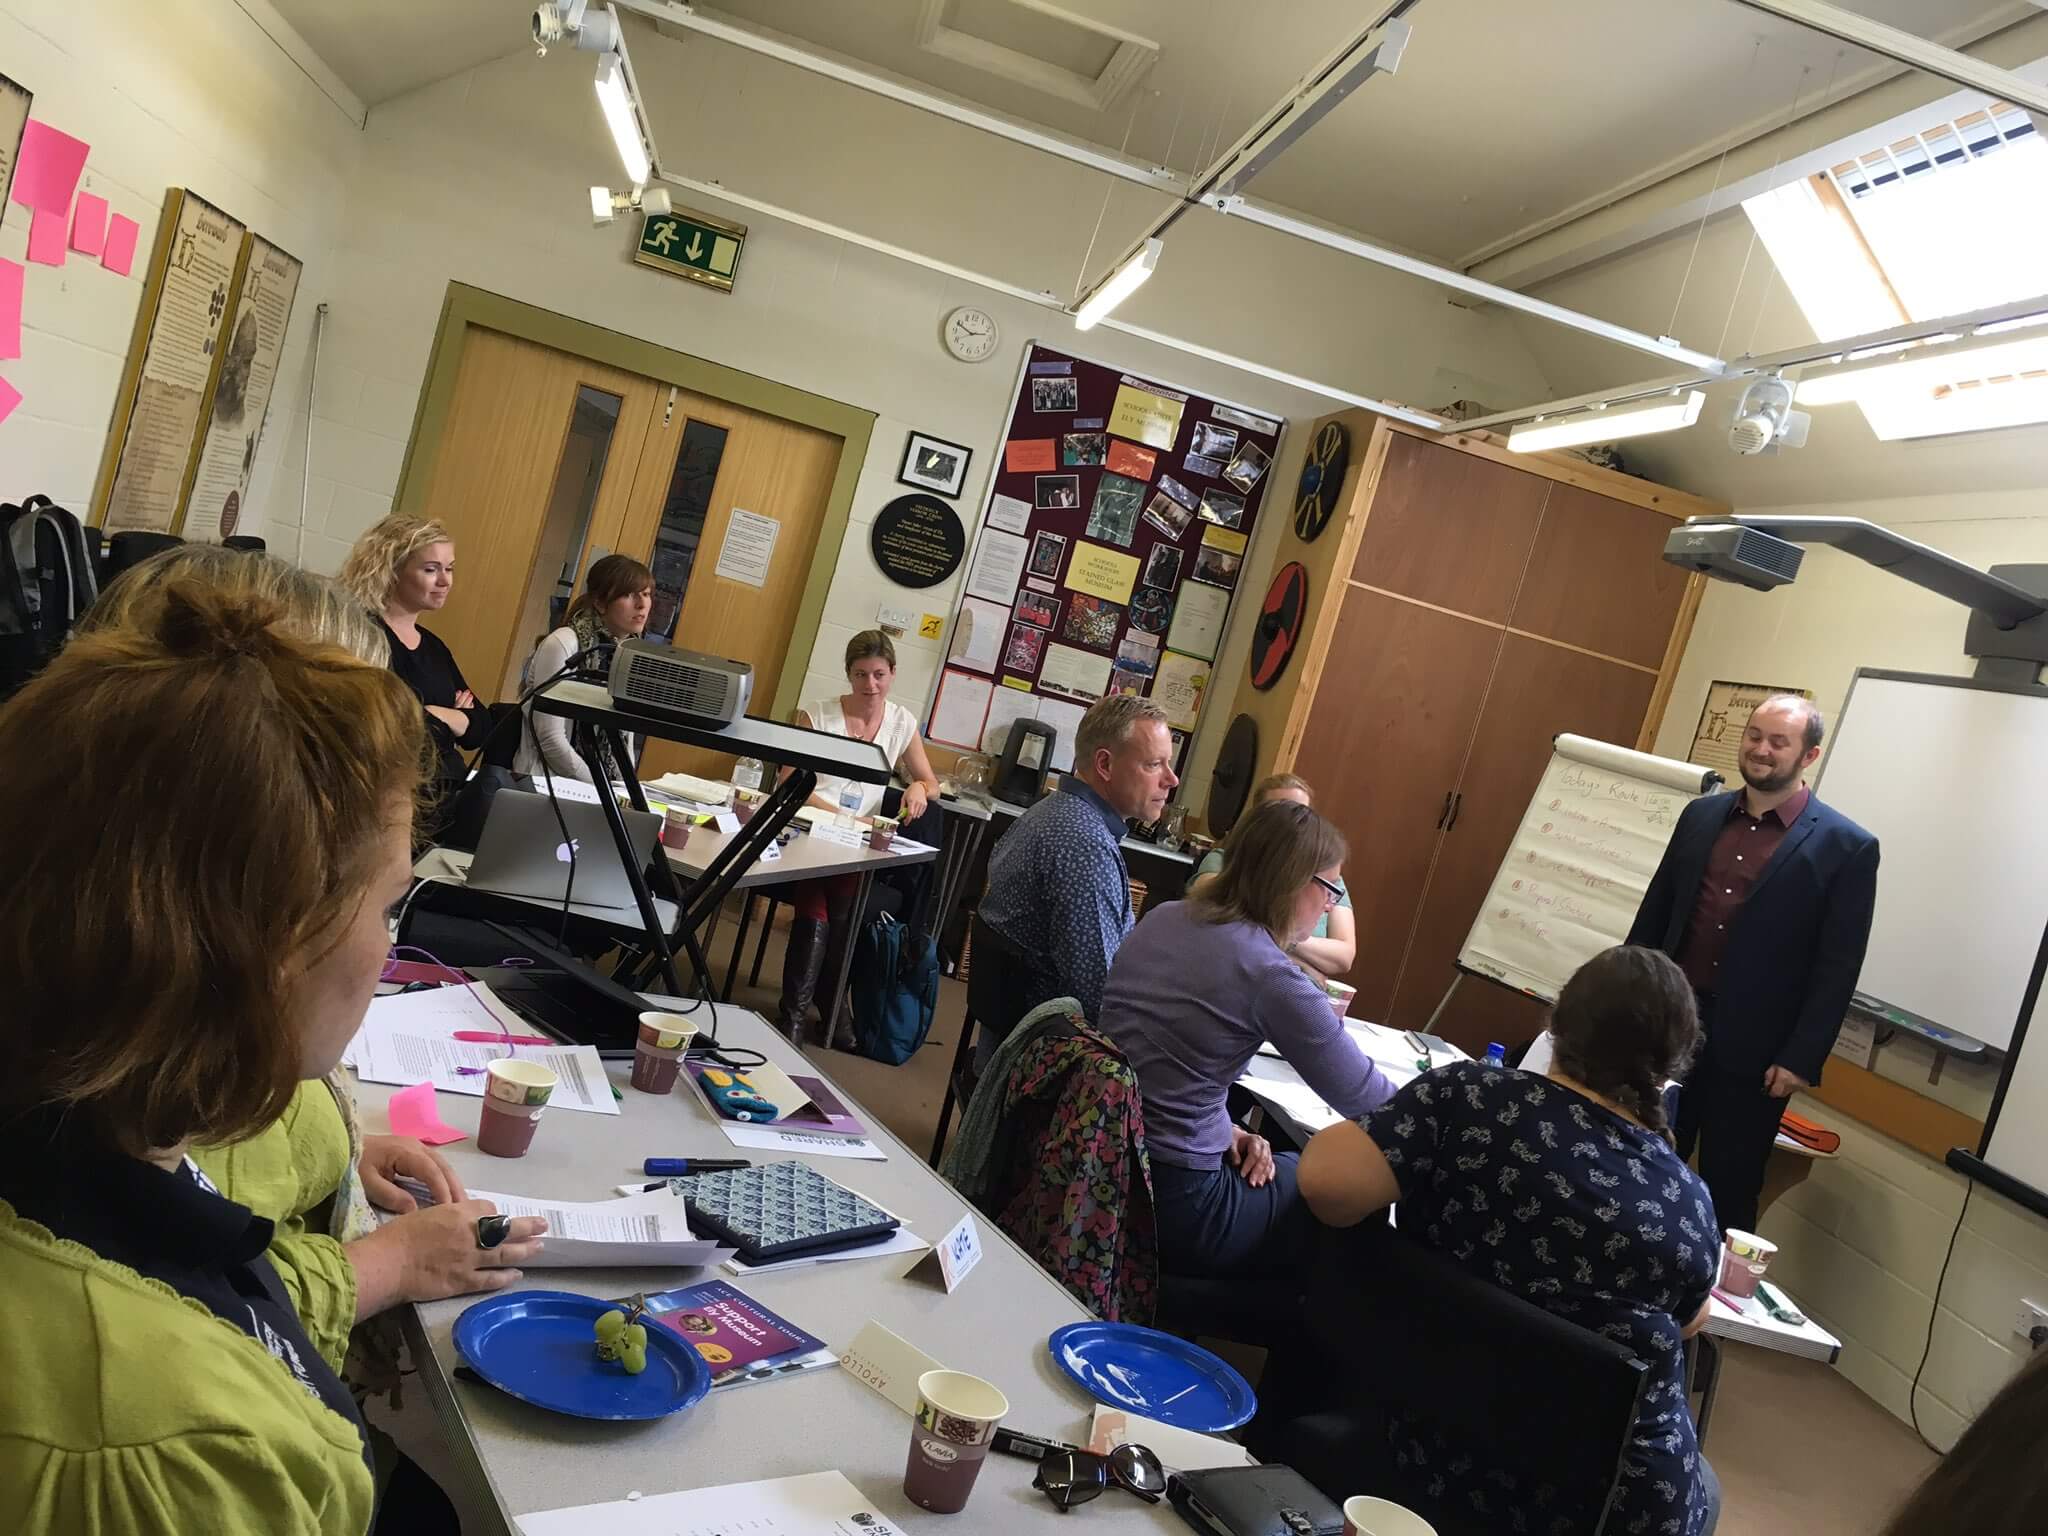 David delivering a training session for a group of 20 museum fundraisers